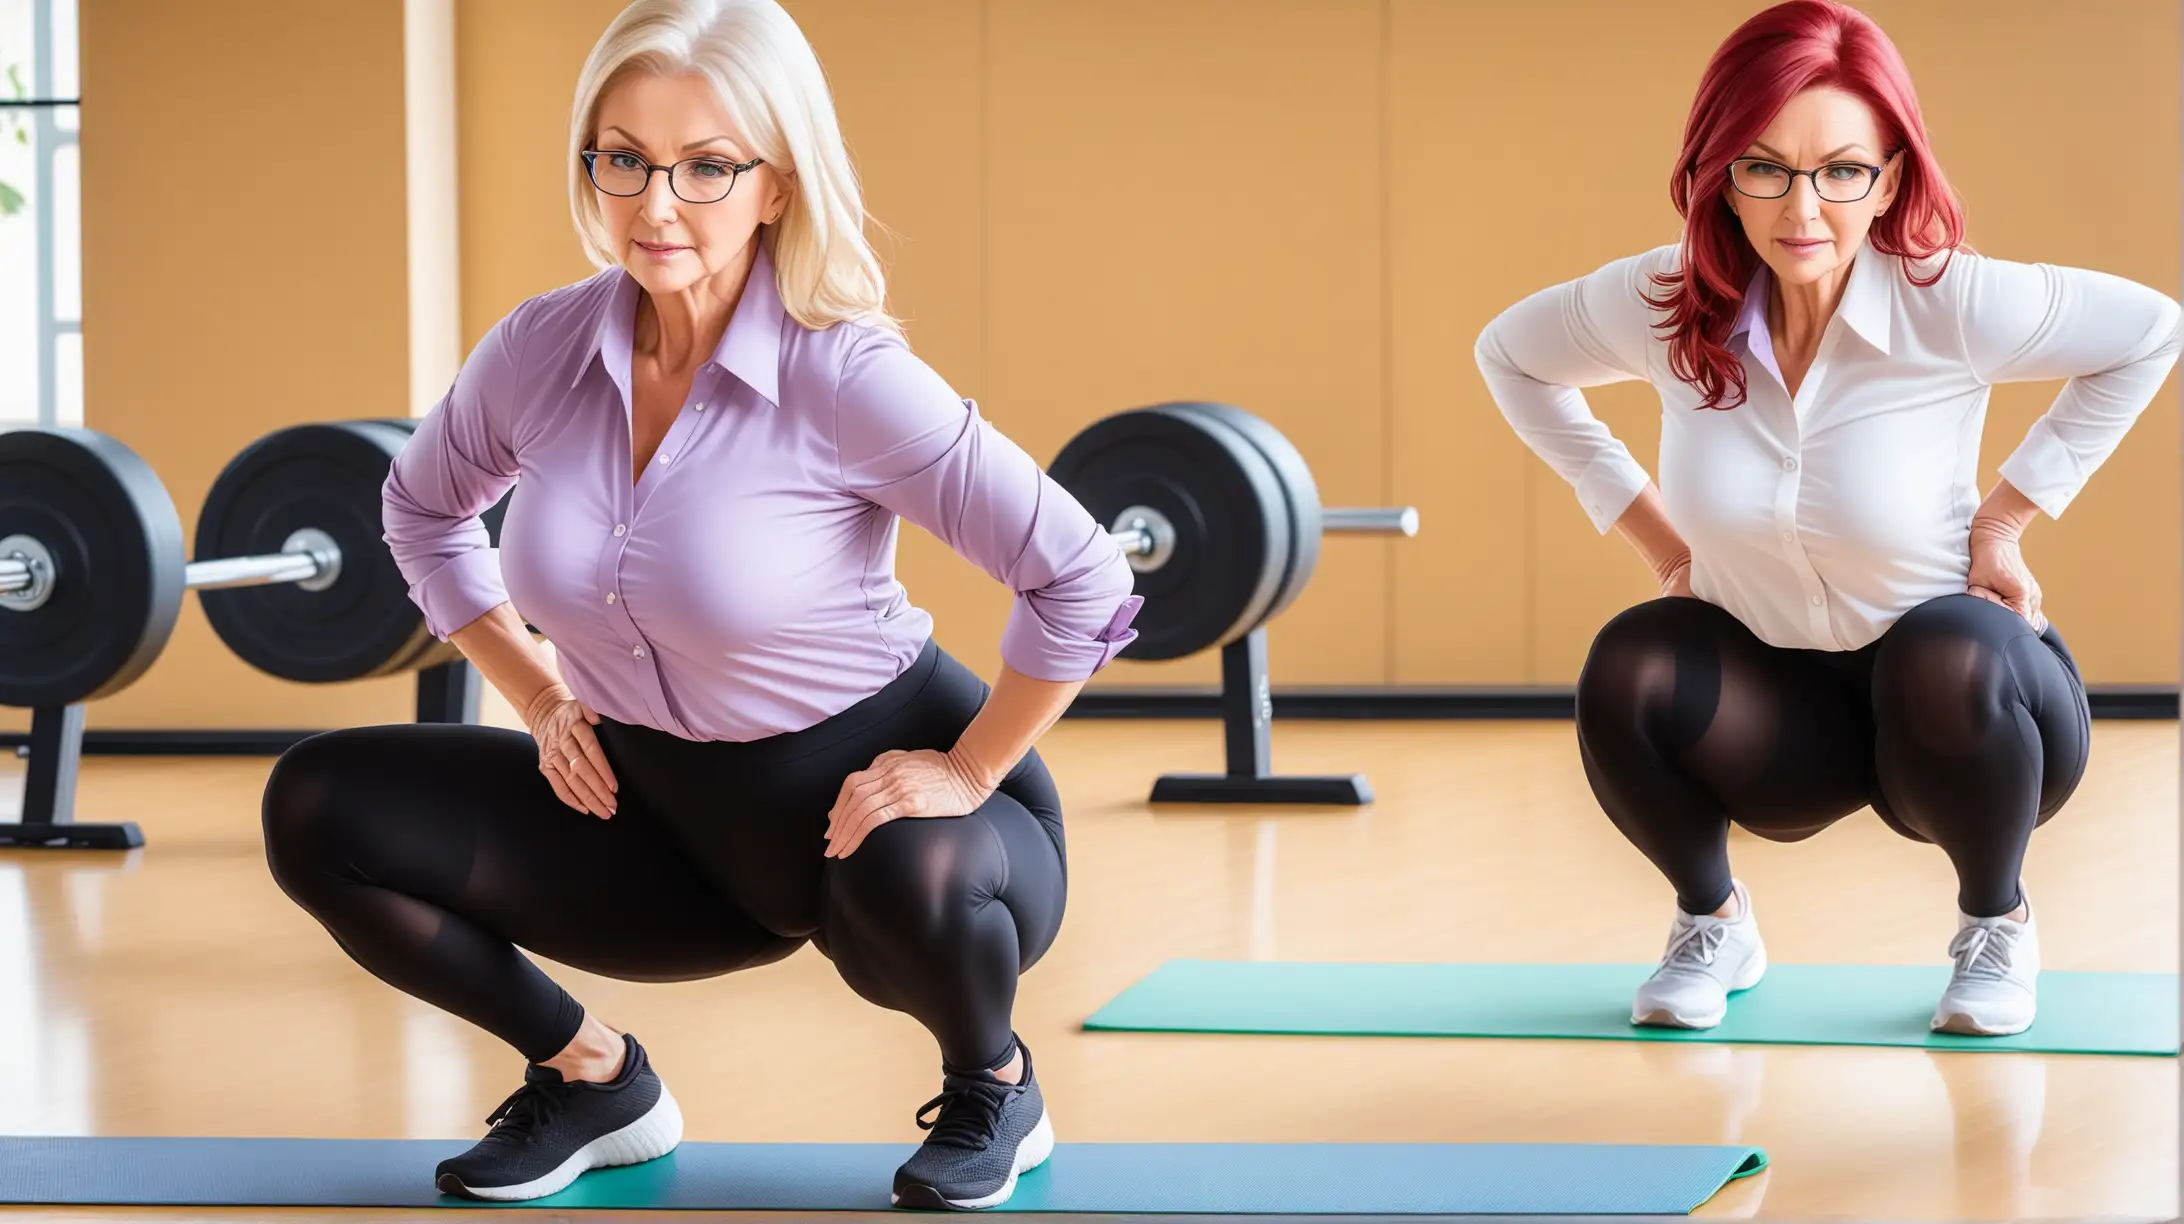 Mature, Blonde Woman, White Untucked Button Shirt, Black Tights, Hands on Hips, back Straight, squatting down to Exercise With a Mature, Red Haired Woman, Glasses, Purple untucked Button Down Shirt, Tight Black Leggings, back straight, squatting down in rhythmic exercise.